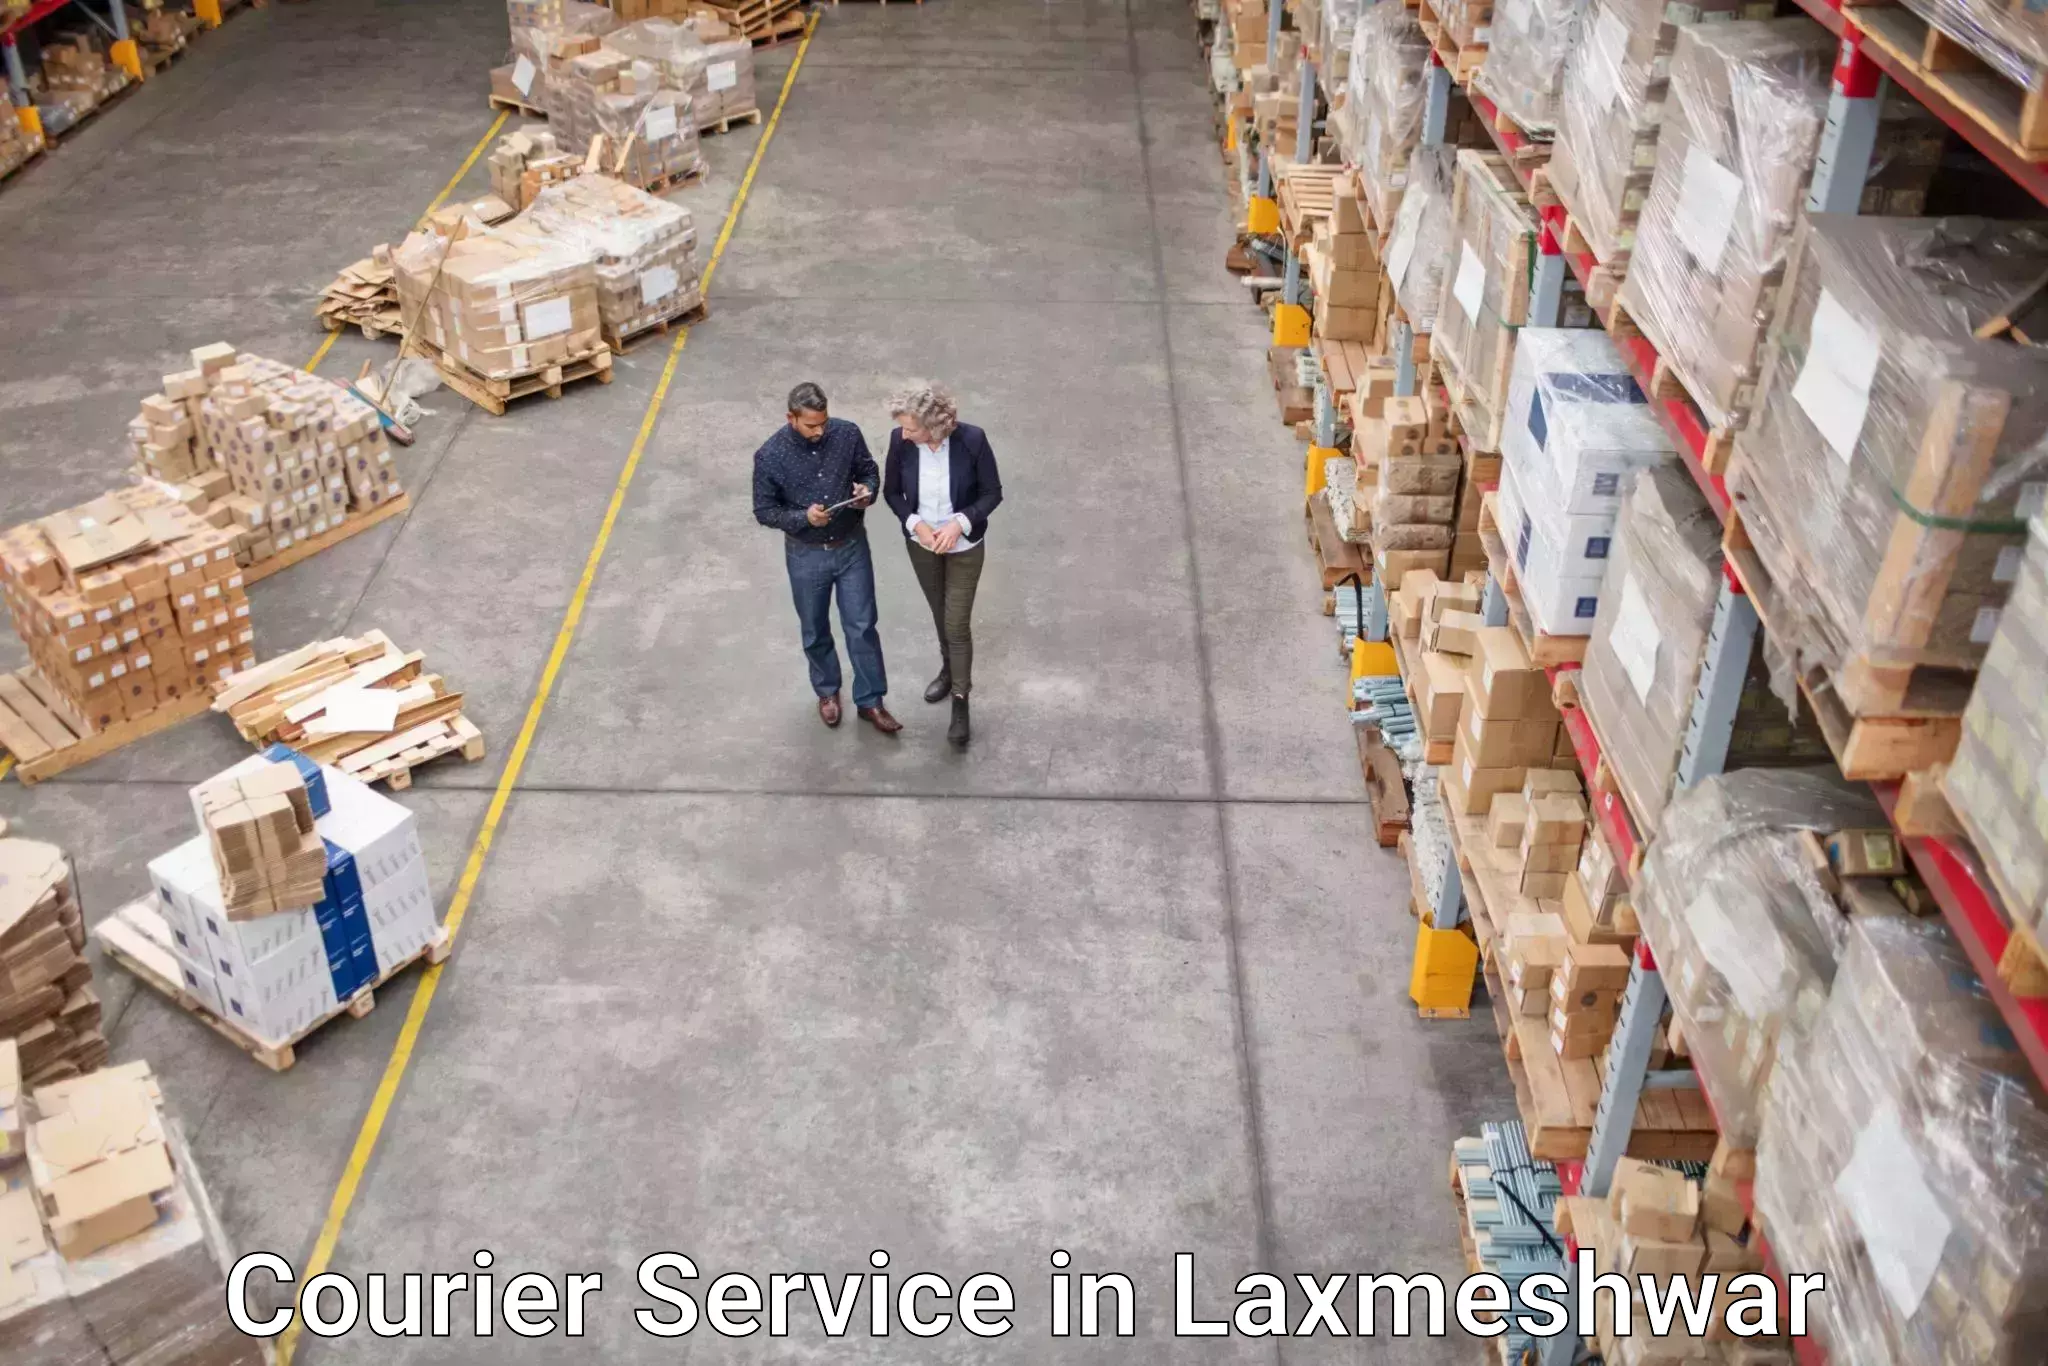 Global courier networks in Laxmeshwar